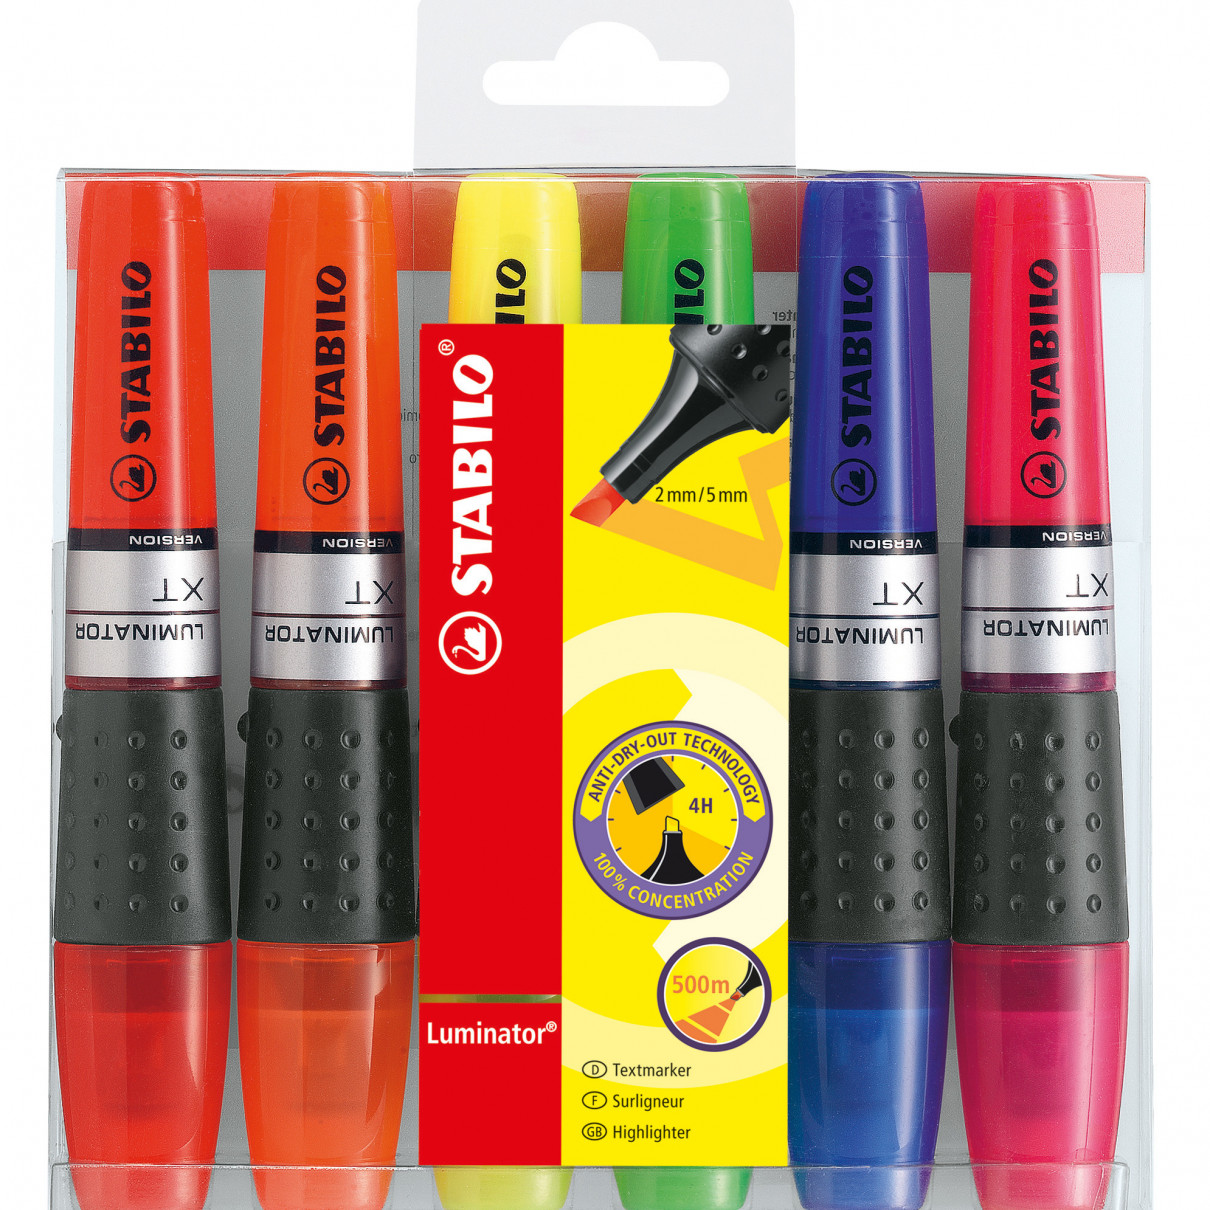 STABILO LUMINATOR Highlighter - Wallet of 6 - Assorted Colours